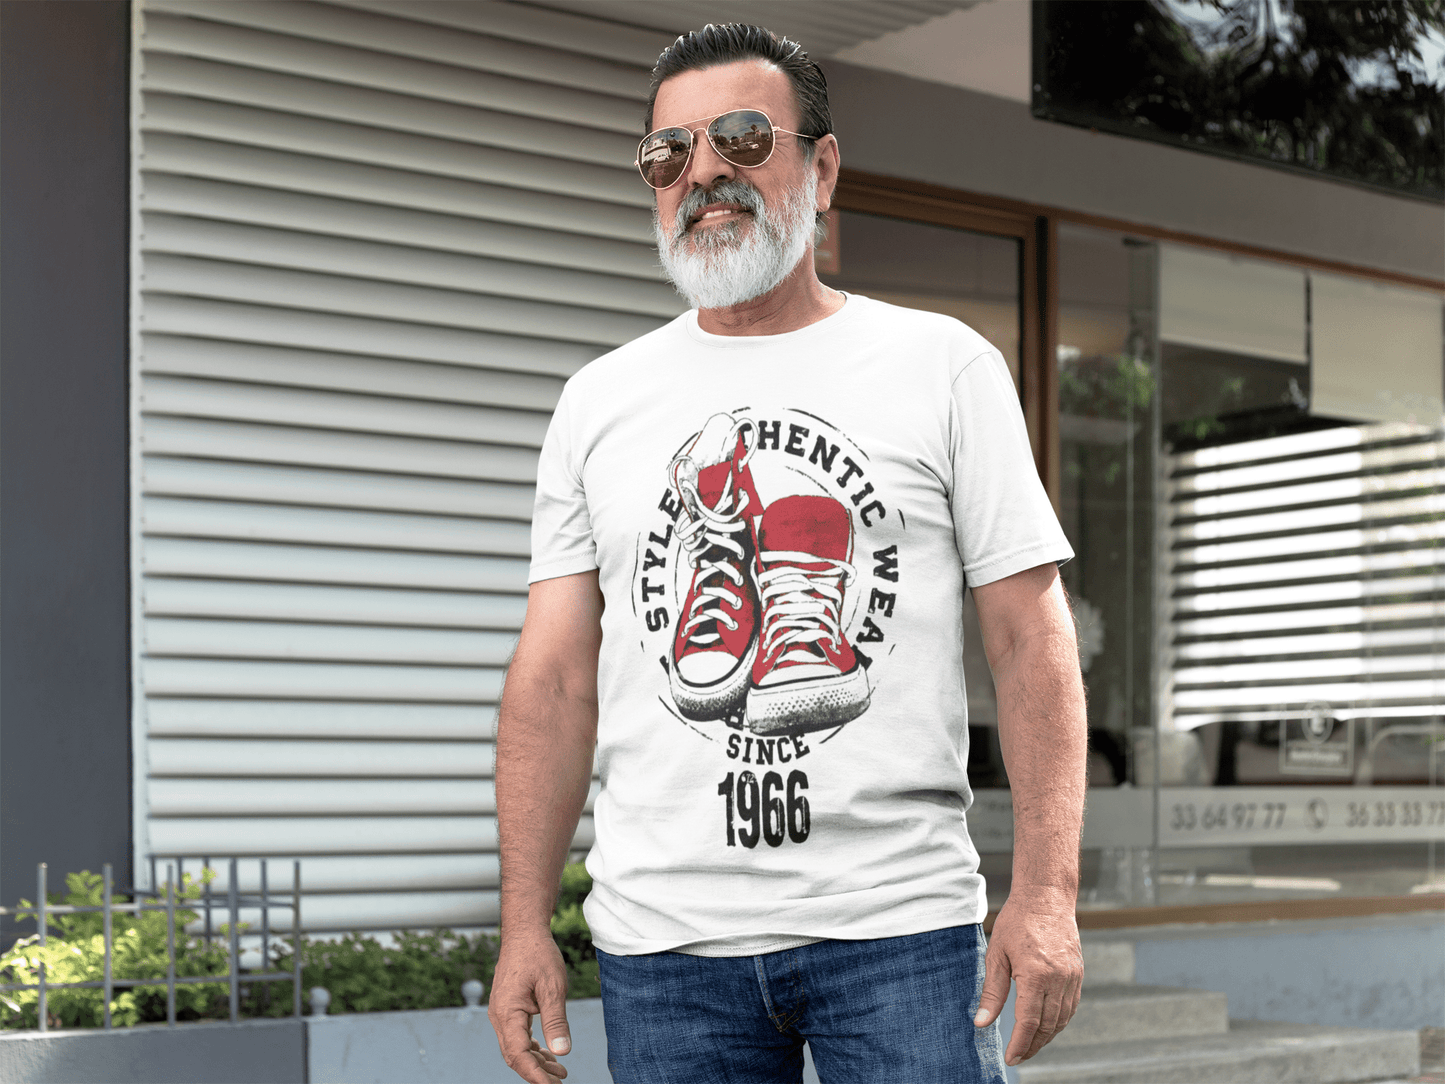 Men's Vintage Tee Shirt Graphic T shirt Authentic Style Since 1966 White